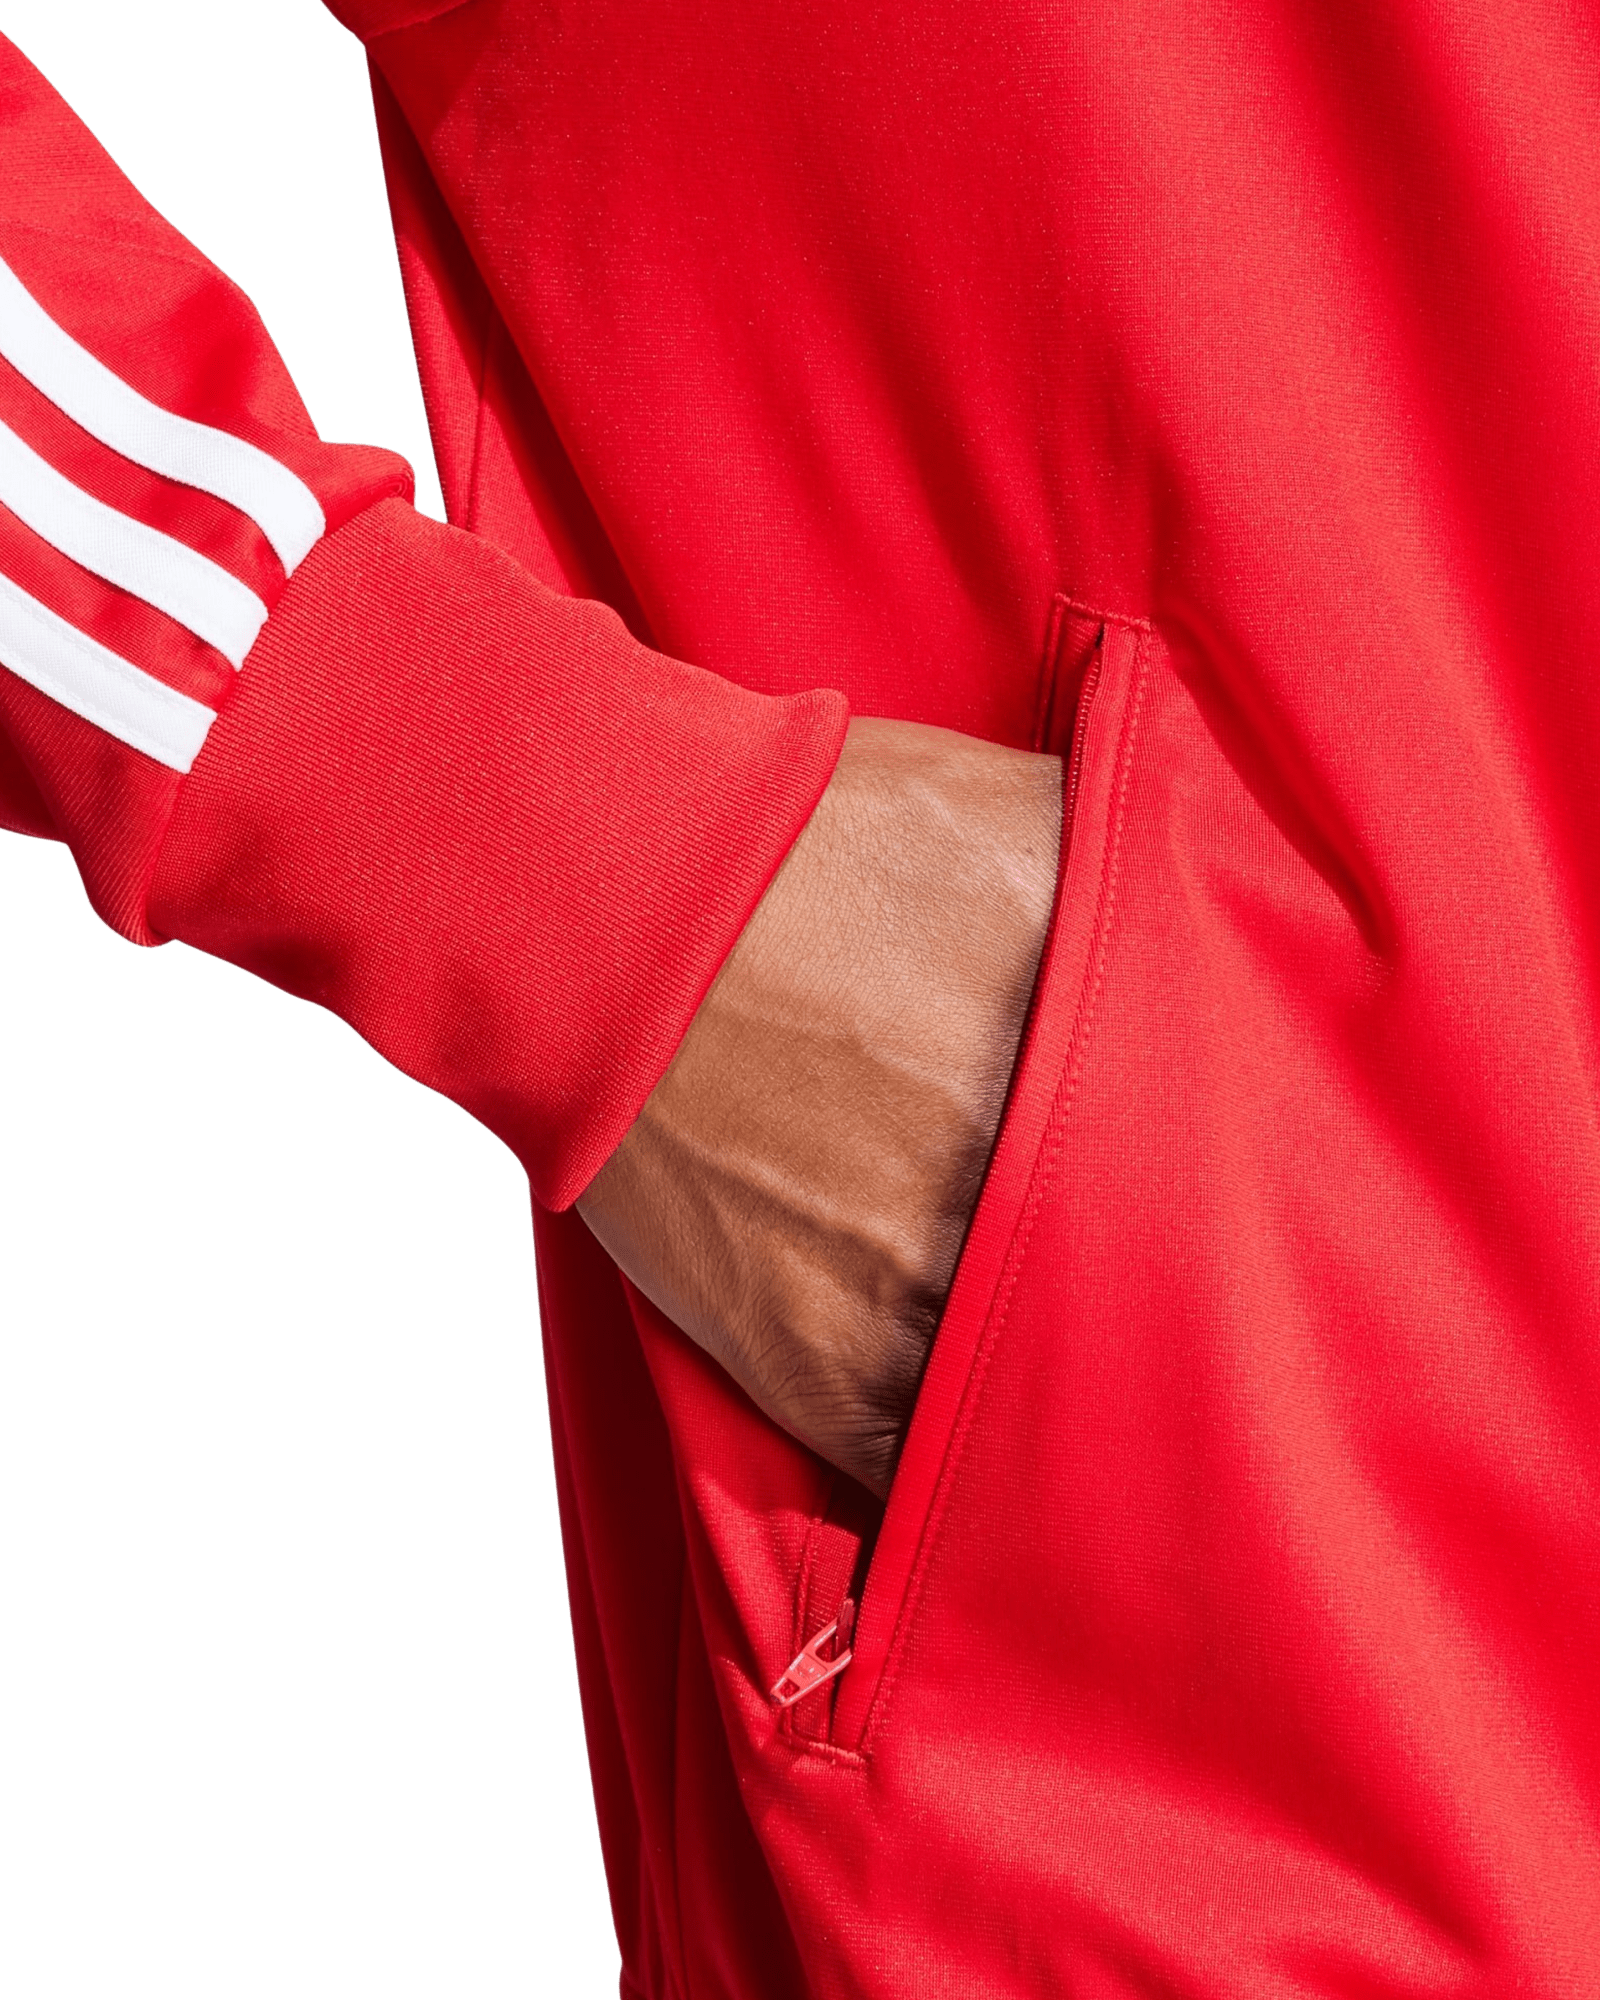 Firebird Track Top $74 adidas Tops Tracksuit Jackets Red